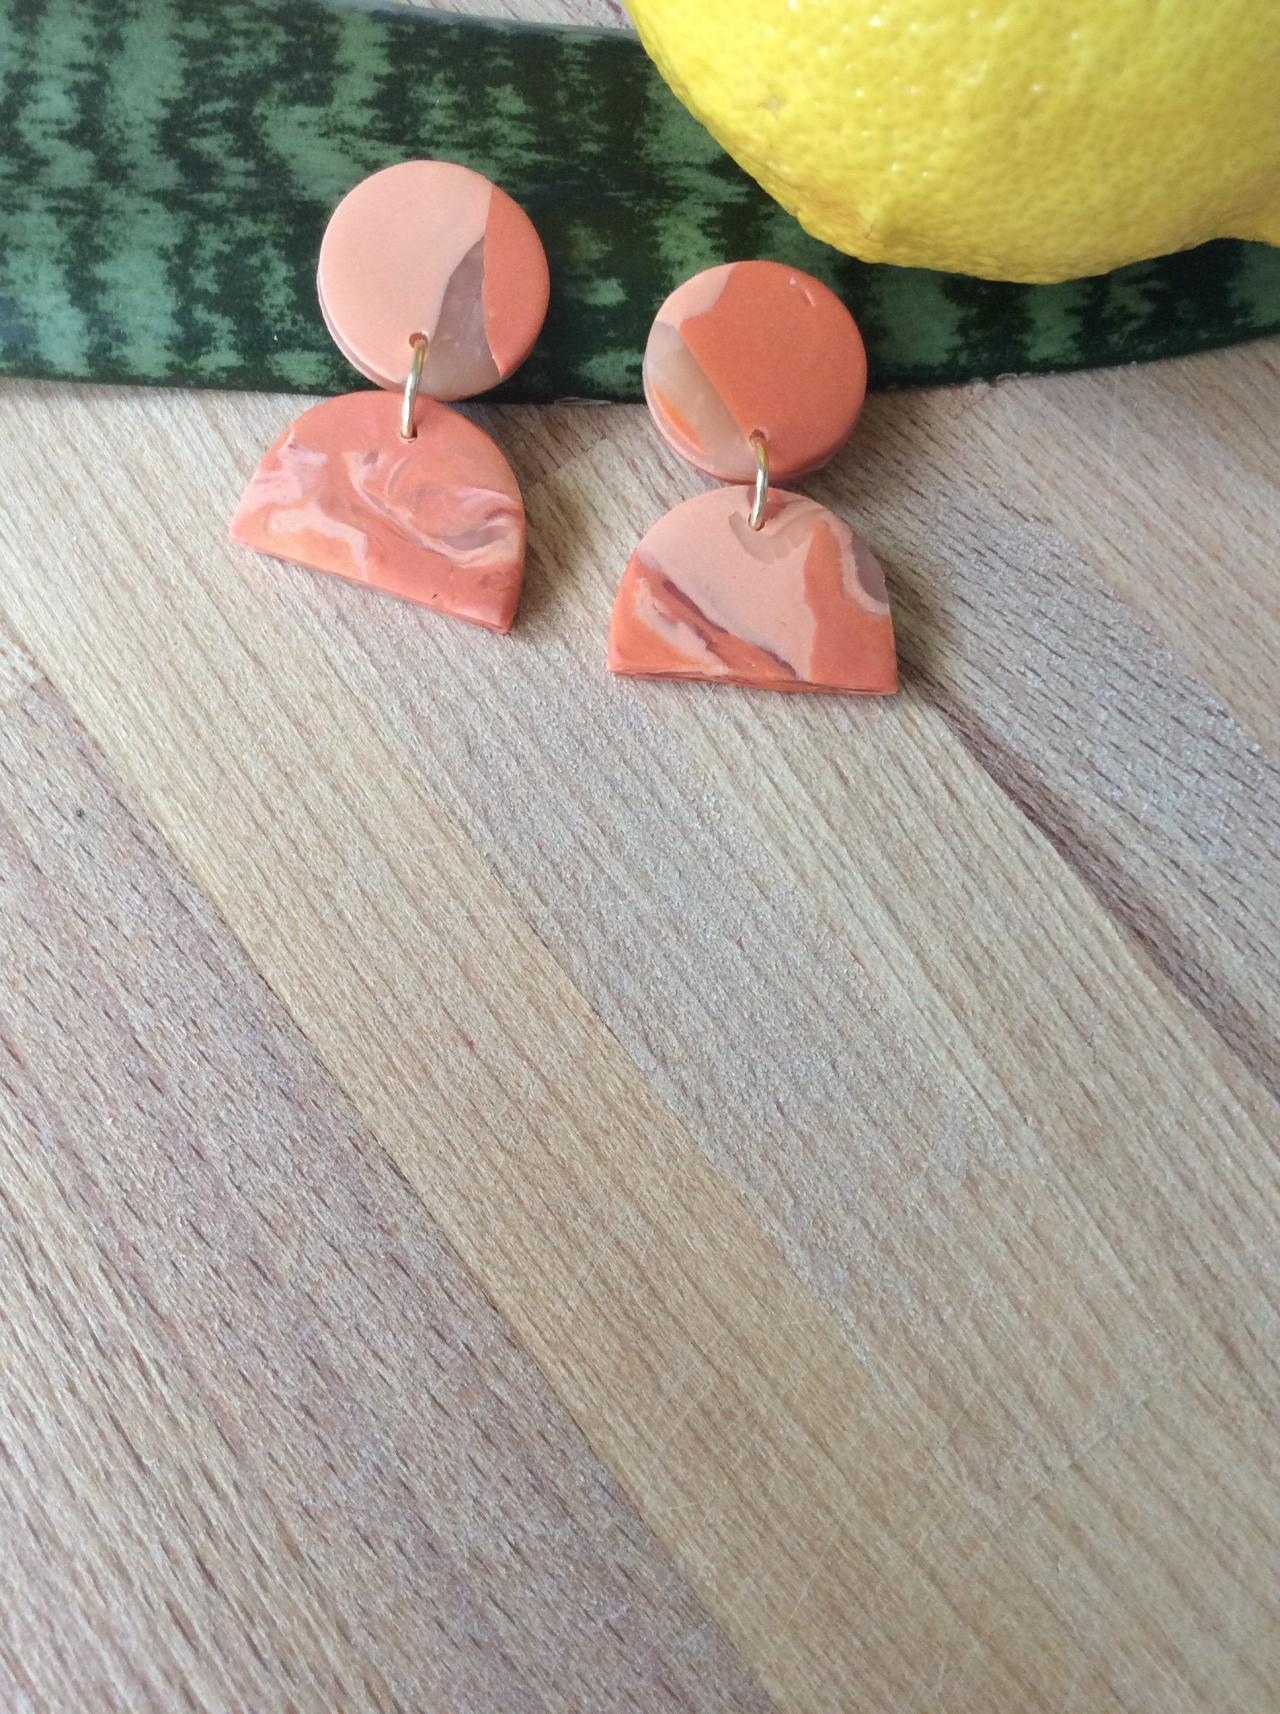 Stormy Half Circle In Orange And Translucent Polymer Clay Earrings | Cute Contemporary Polymer Clay Drop Earrings